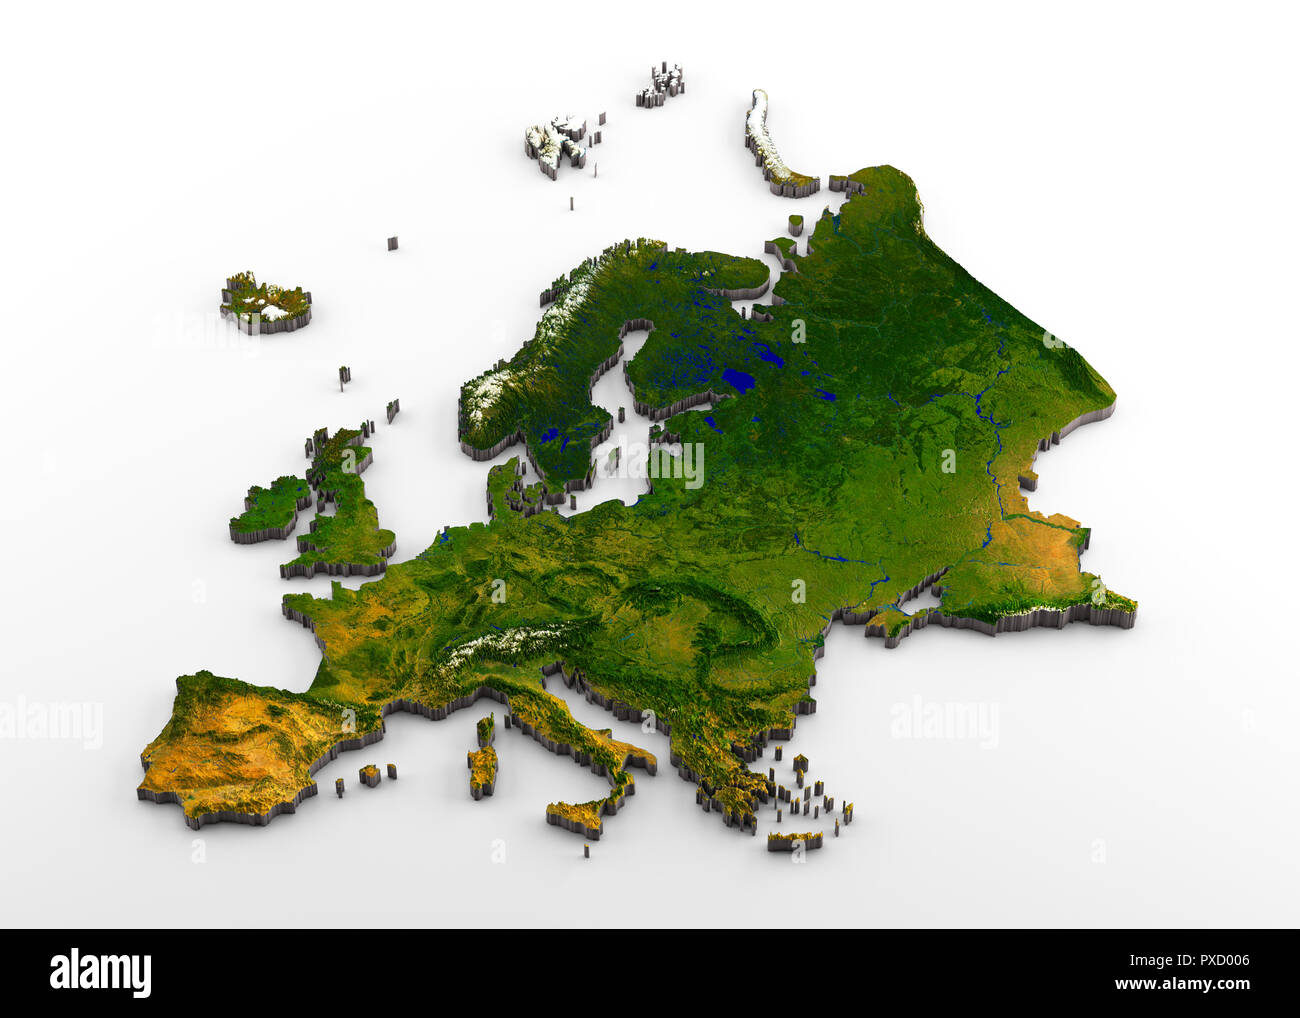 Realistic 3D Extruded Map of the European Continent (inclusive of Western Europe,Eastearn Europe,and western part of Russia) Stock Photo